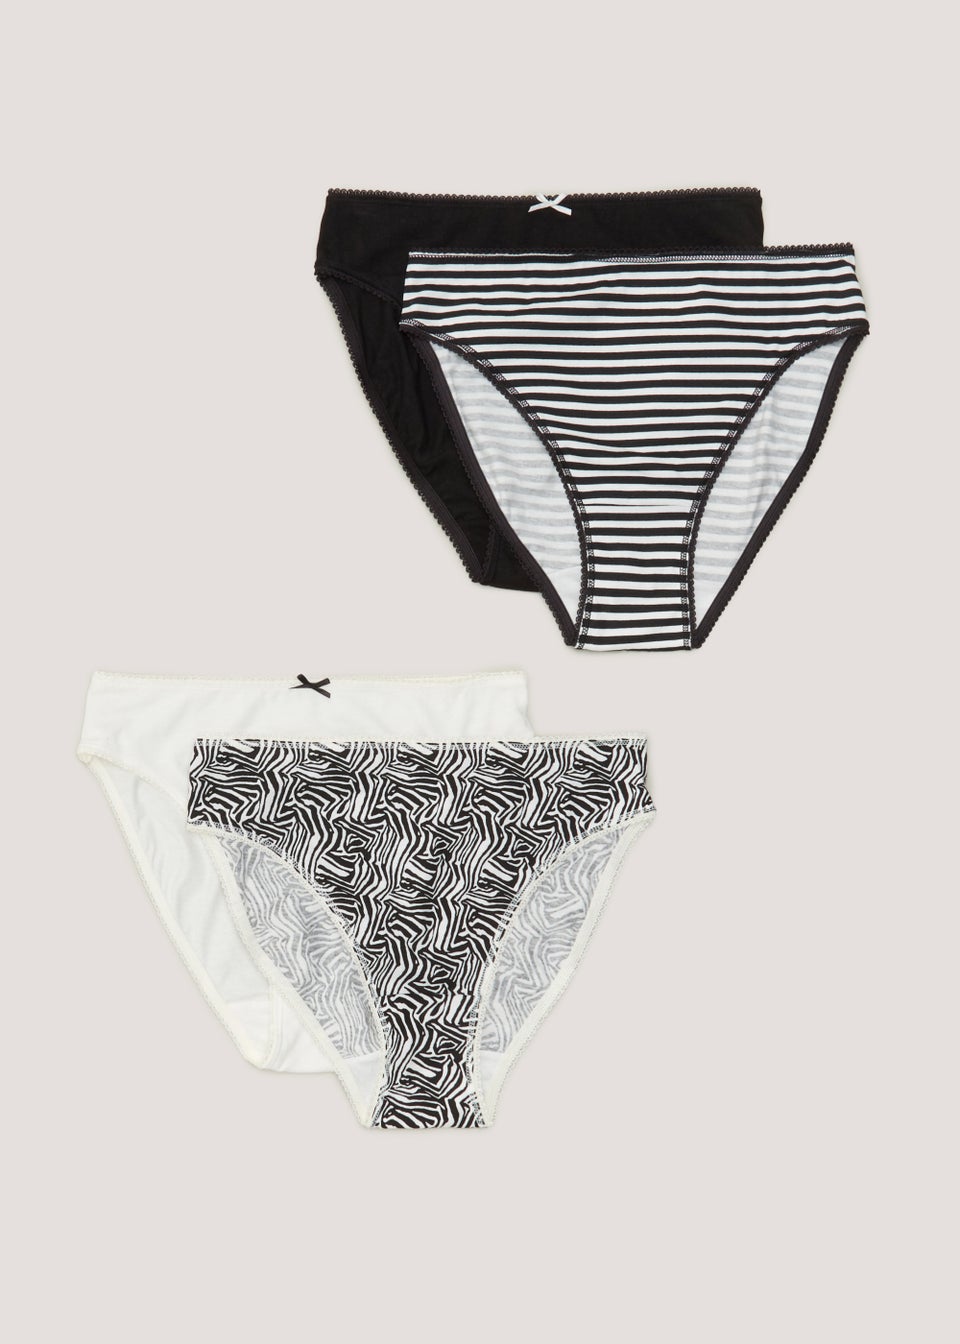 cynthia chaffey recommends Black And White Panties